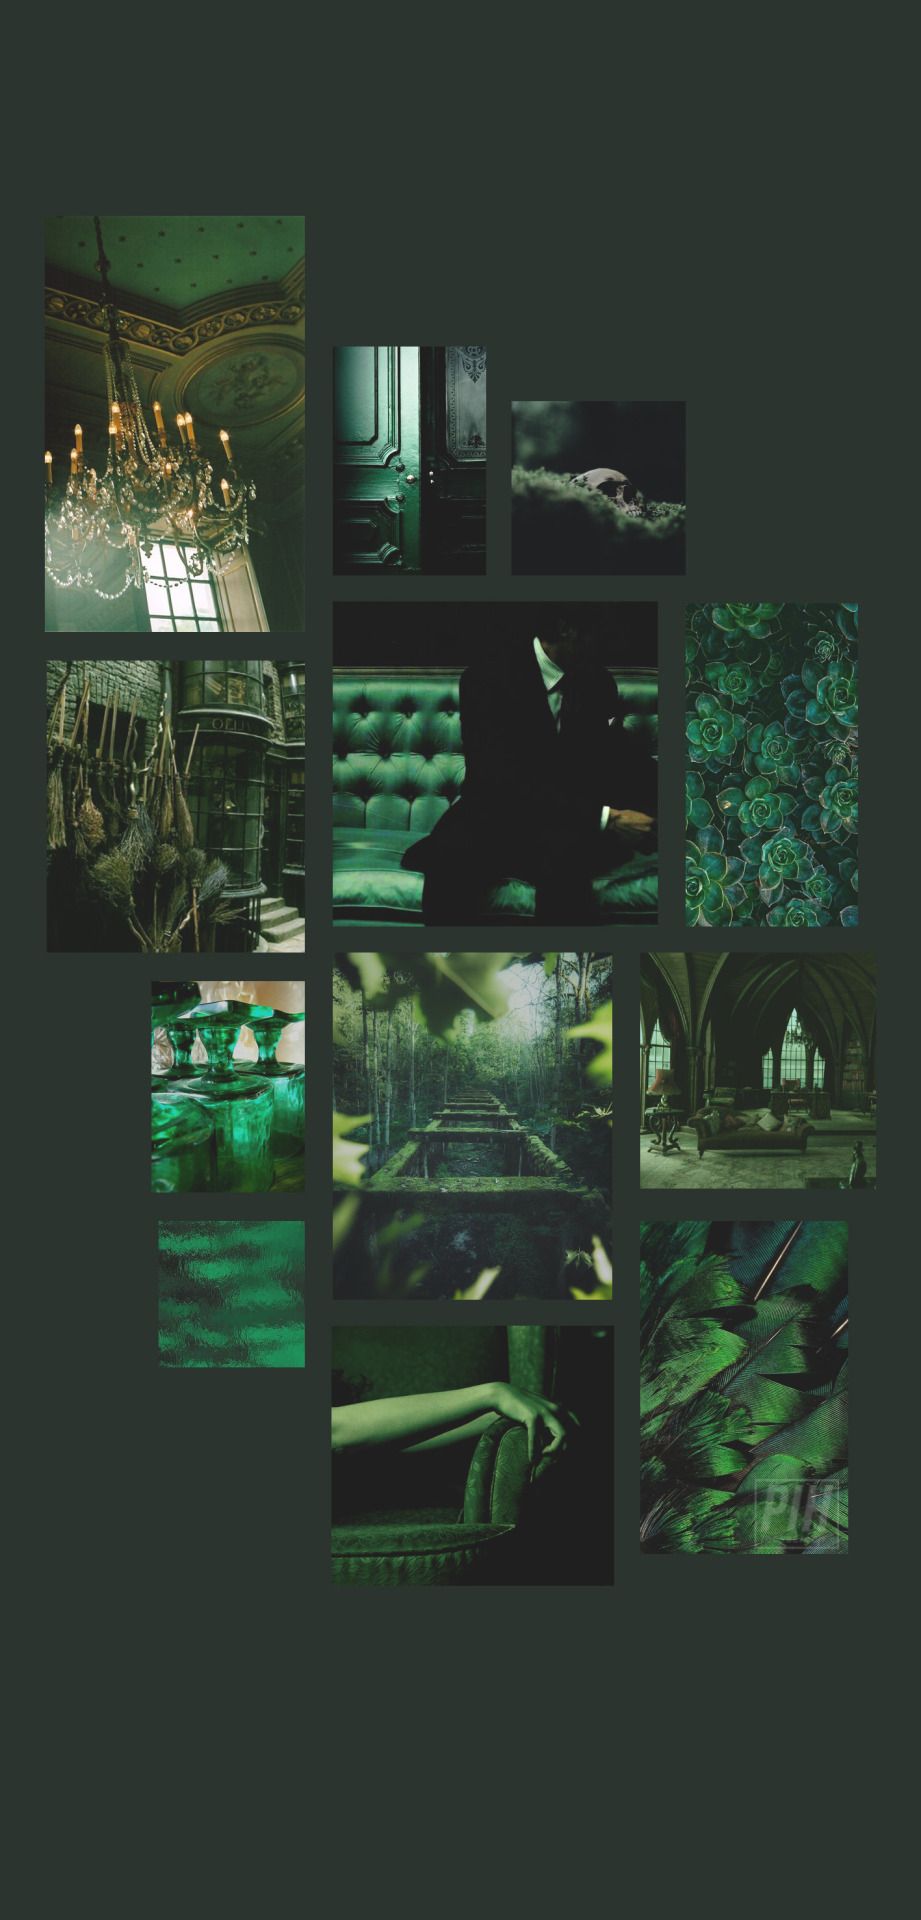 Aesthetic pictures of the Harry Potter series, specifically of the Slytherin house. - Slytherin